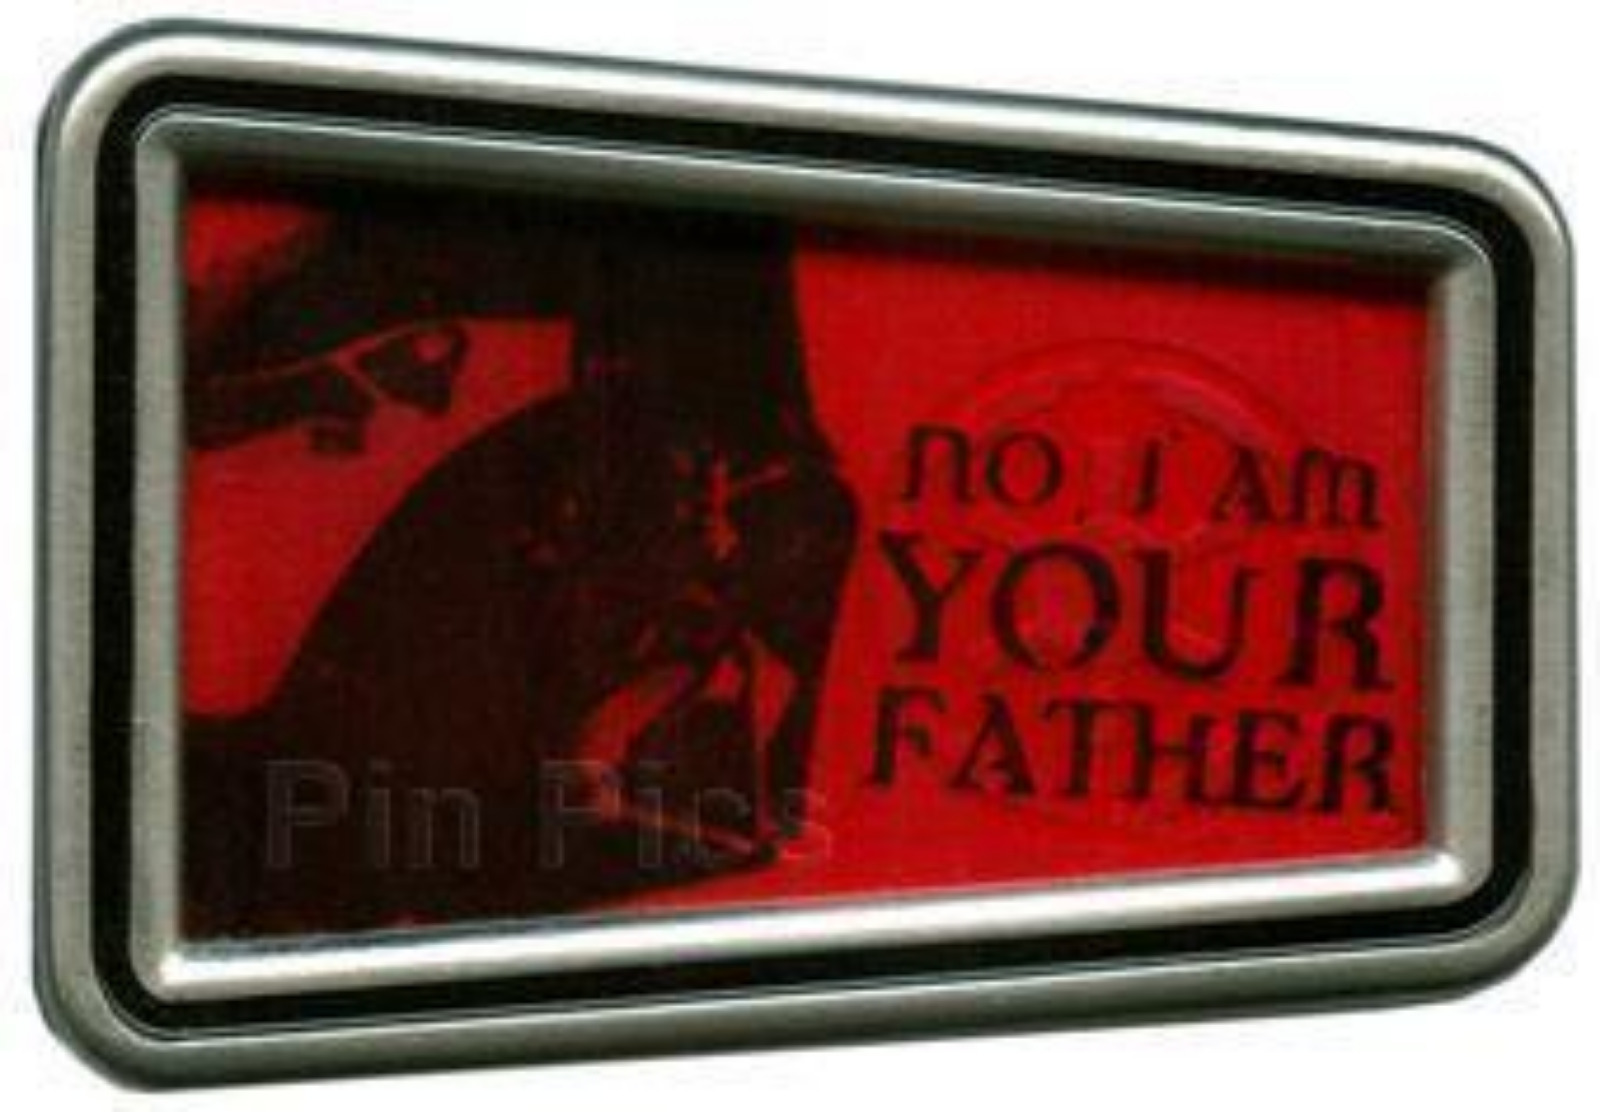 Disney Pin 85300 Sci-Fi Star Wars Quotes Darth Vader Luke I am your father LE #